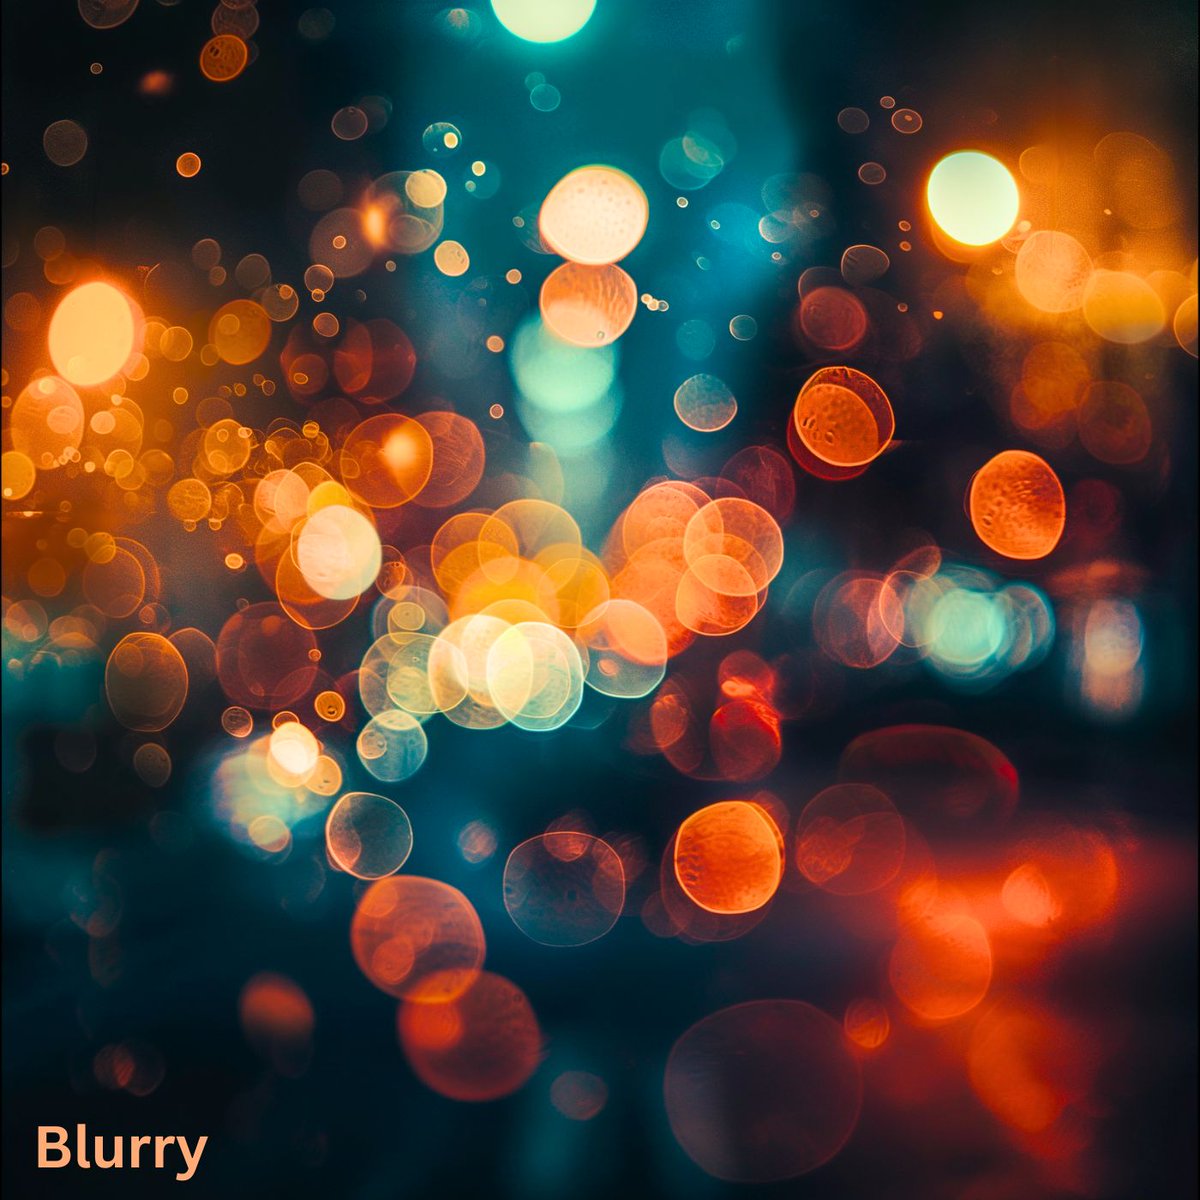 'Blurry' is an album that tenderly wraps the wistful feelings of nostalgia in melodies that feel like old friends. It's the soundtrack for the blurred memories that linger in my heart. #ambient #ambientguitar #ambientmusic

LISTEN-thespeakers1.bandcamp.com/album/blurry